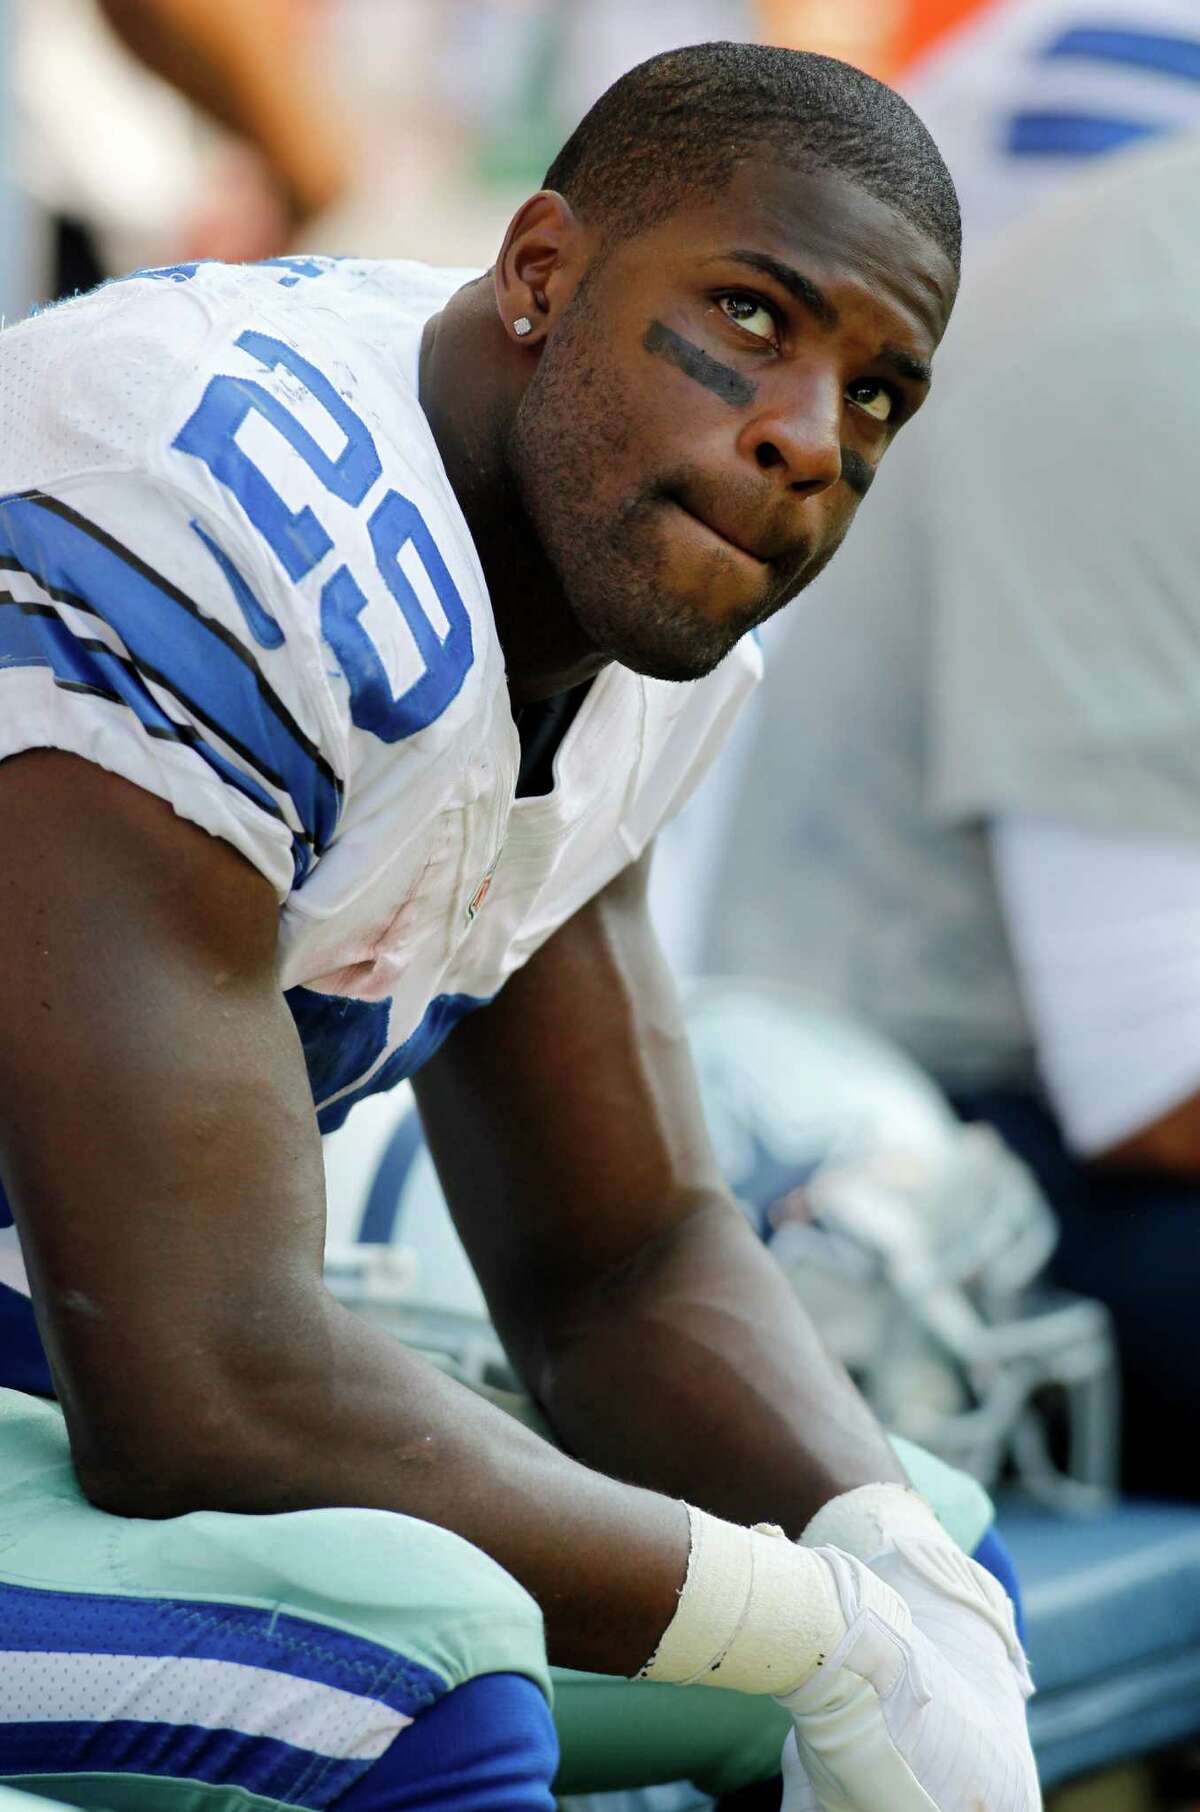 Dallas Cowboys running back DeMarco Murray last played Oct. 14 vs. Baltimore, when he sprained his right foot in the first half and has missed six straight games as of Nov. 27, 2012.